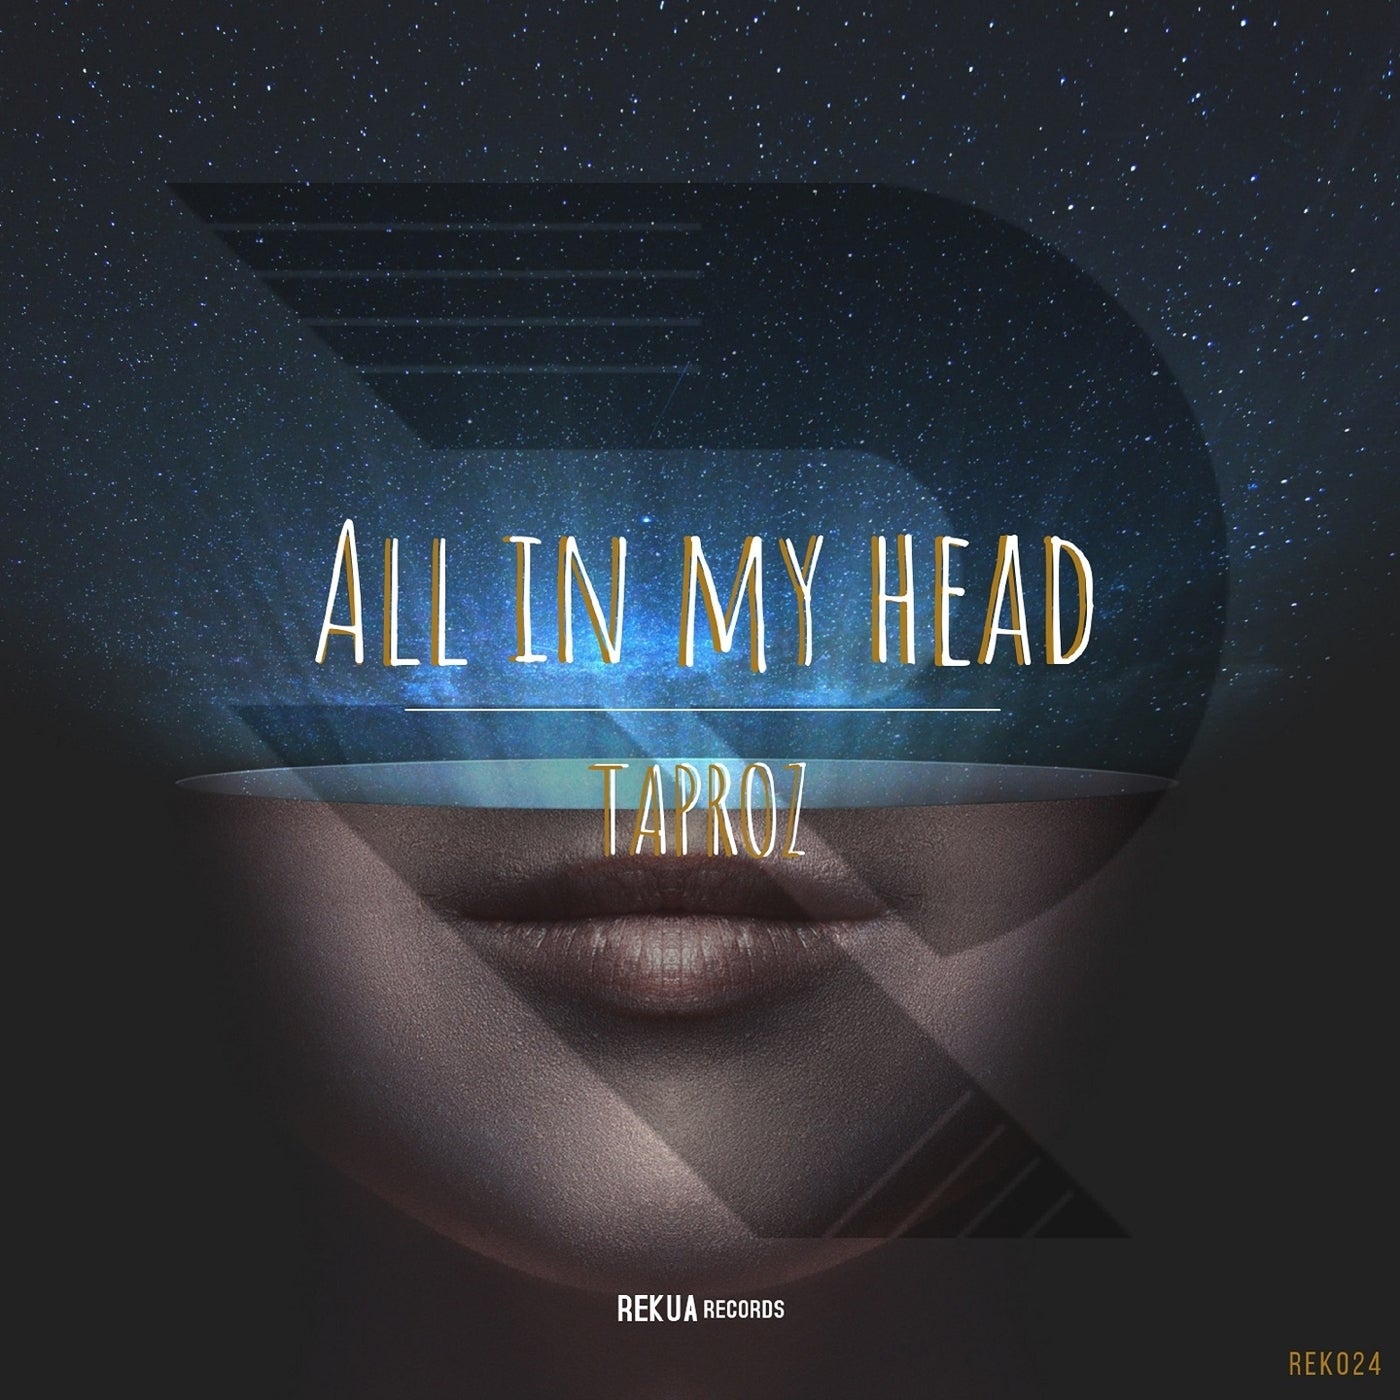 All in My Head